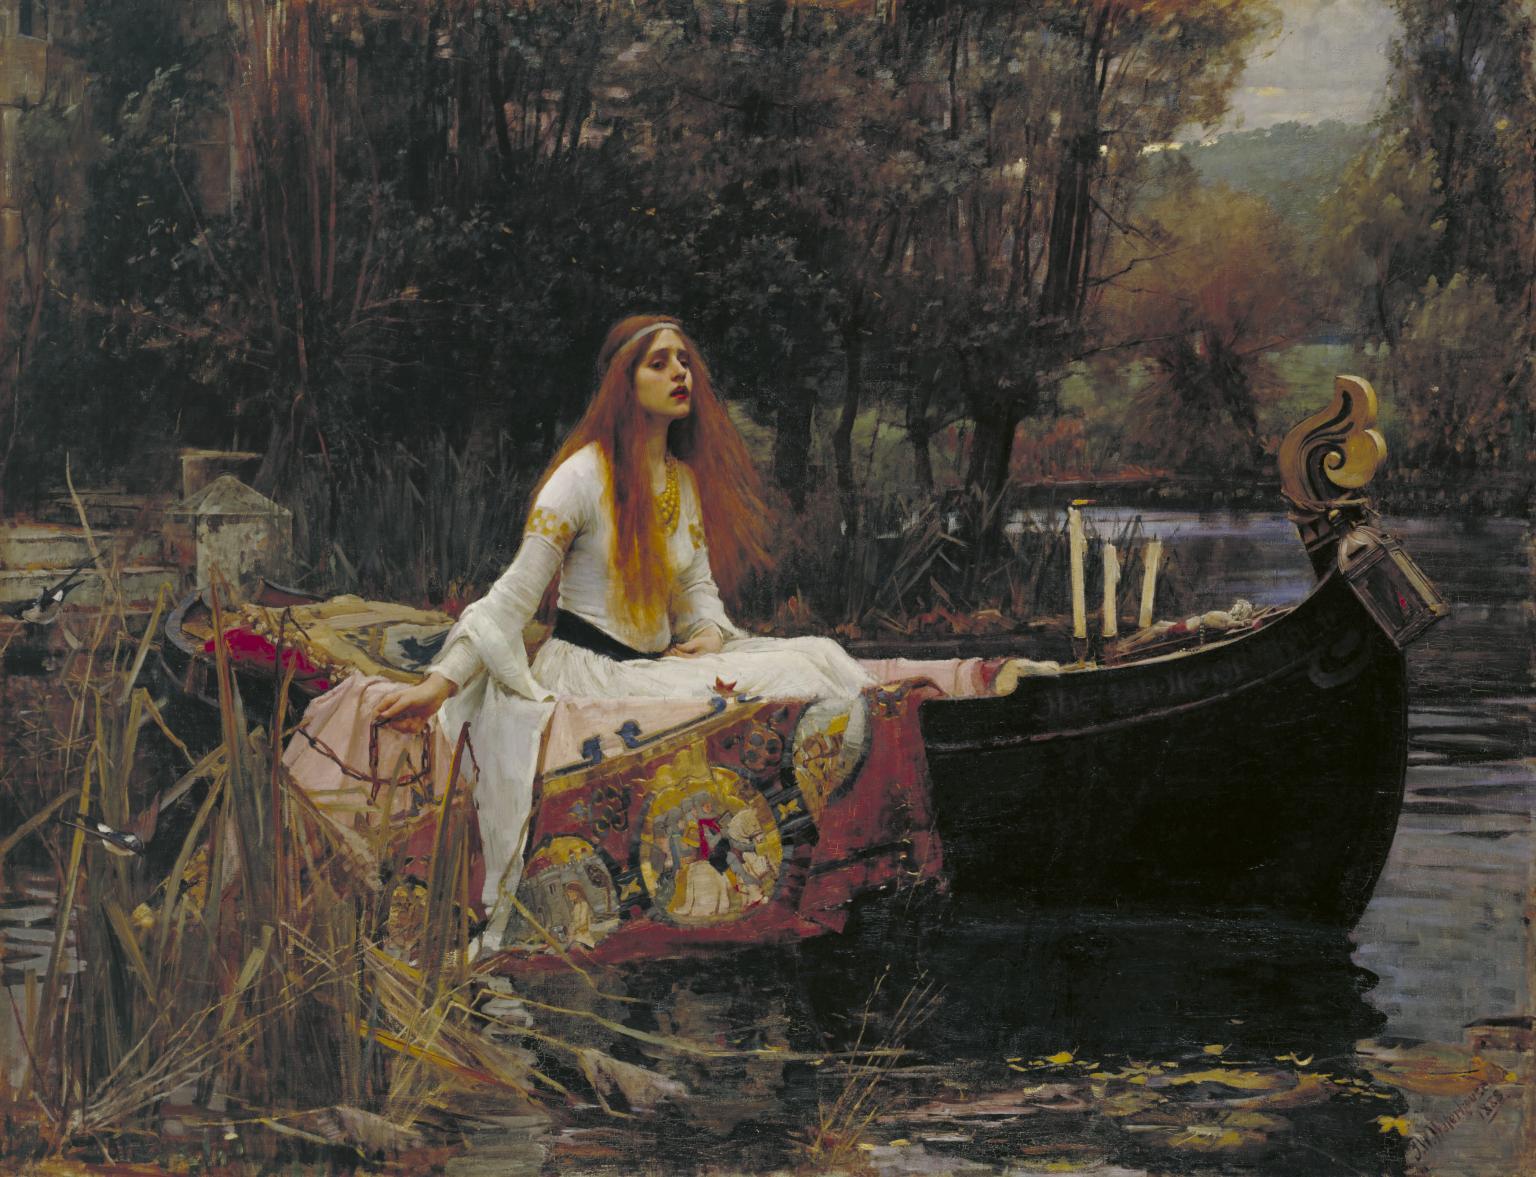 The painting depicts Tennyson's 'The Lady of Shalott' sitting upright in a boat with a solemn expression. She is surrounded by red and brown vegetation